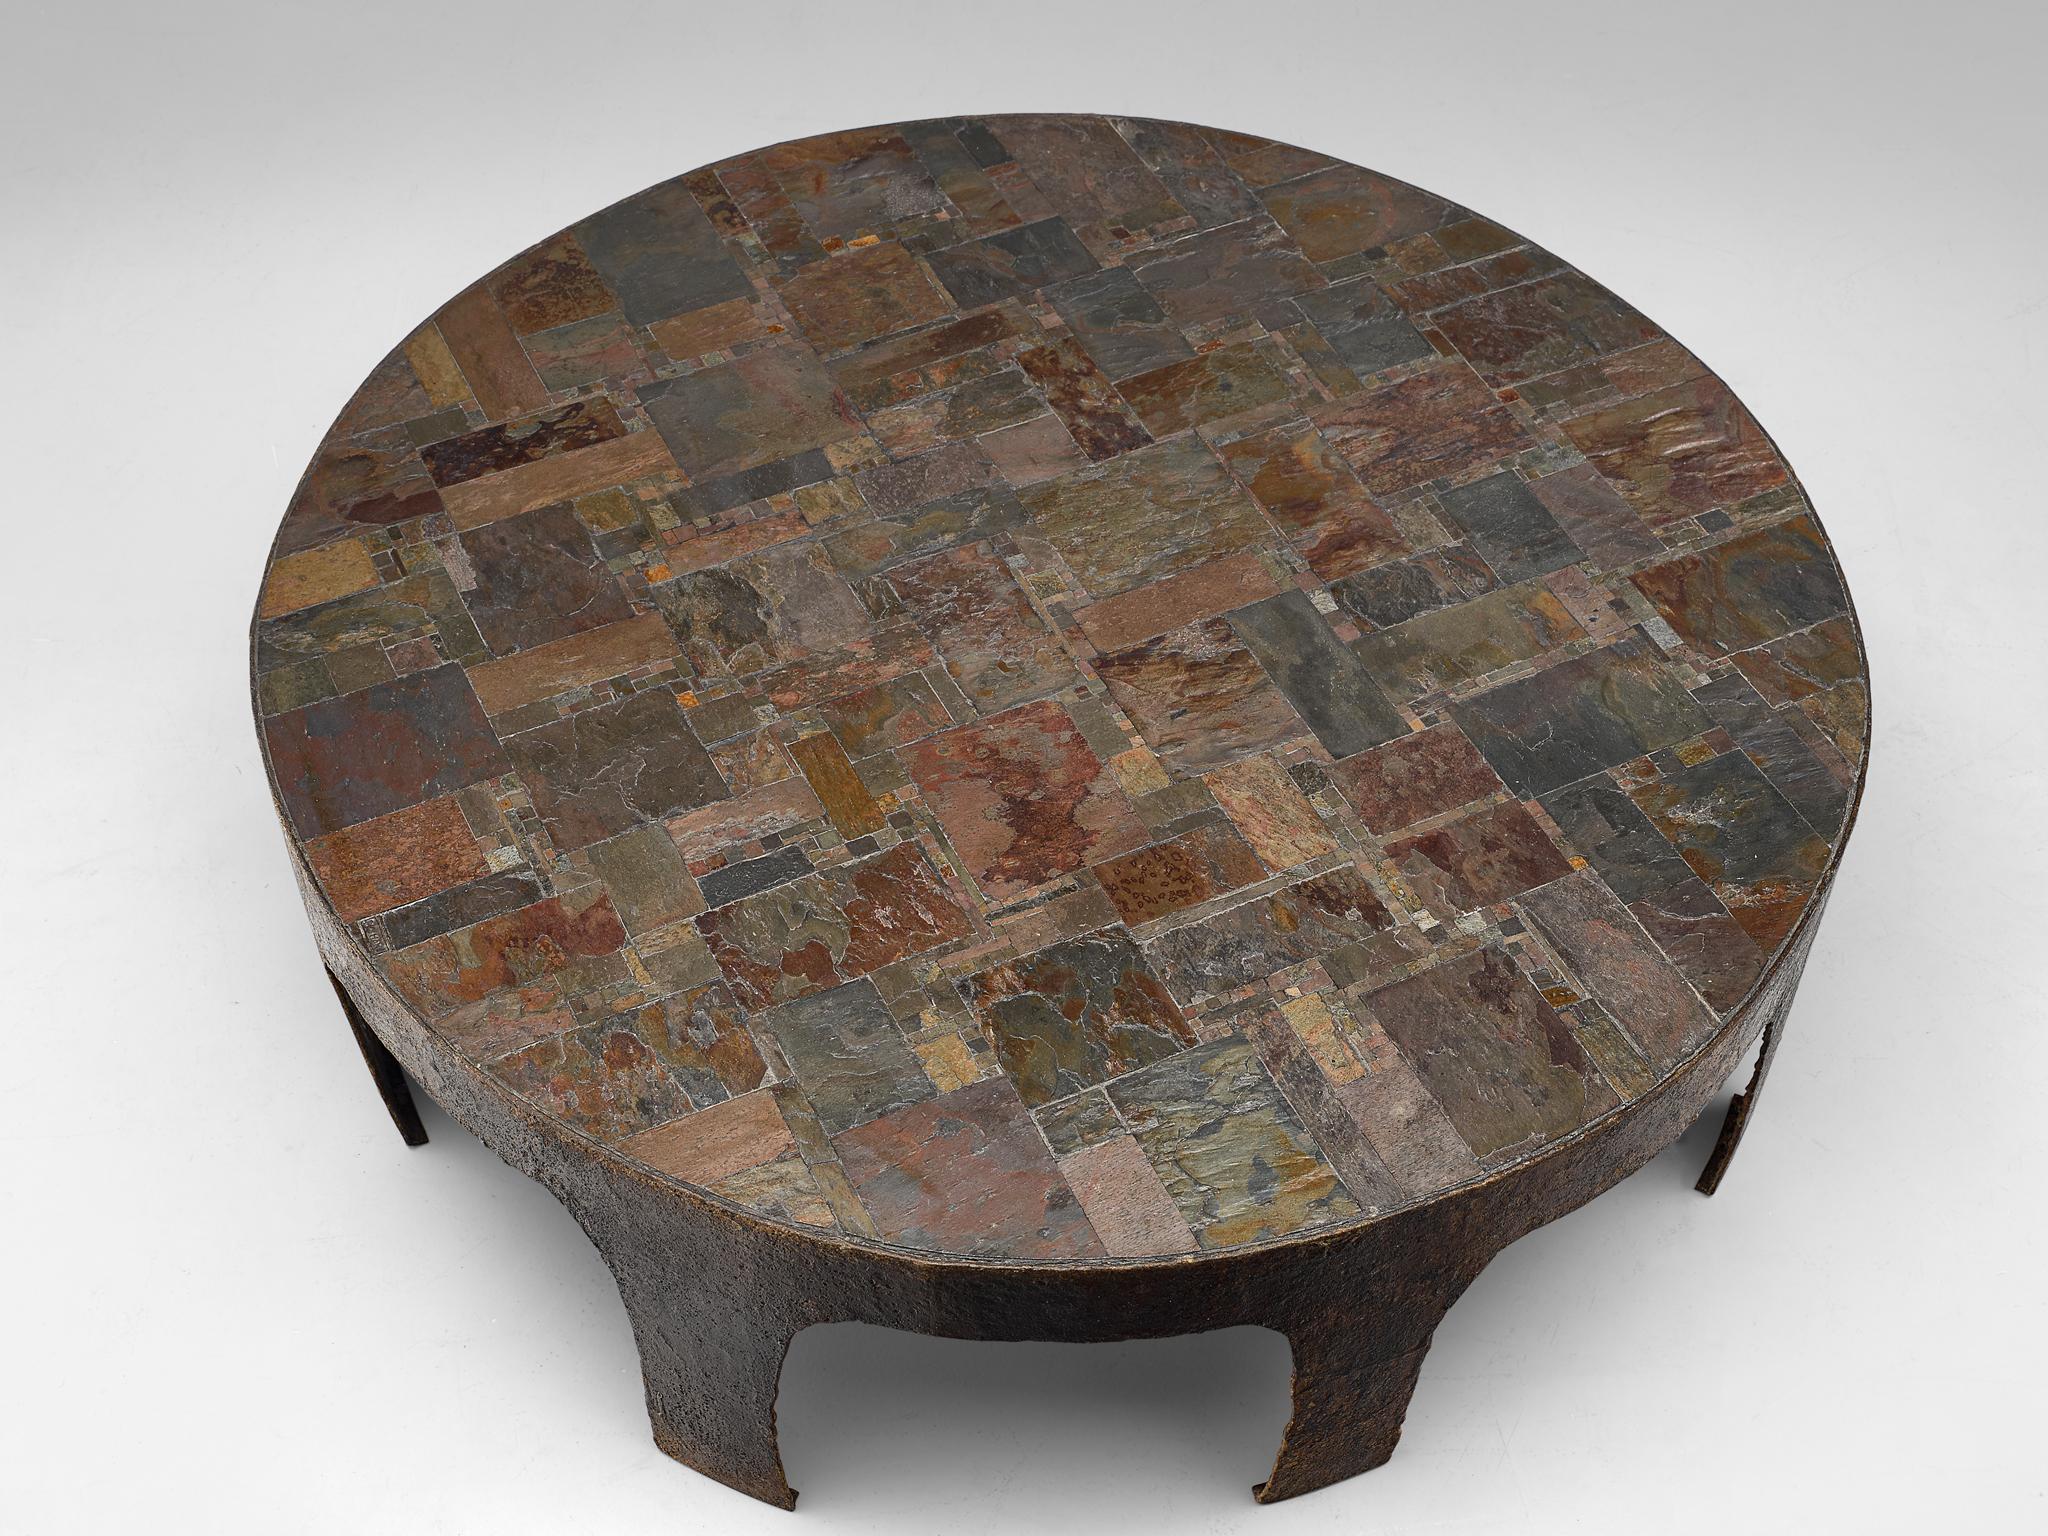 Brutalist Pia Manu Hand Crafted Coffee Table with Natural Stone Mosaic and Iron For Sale